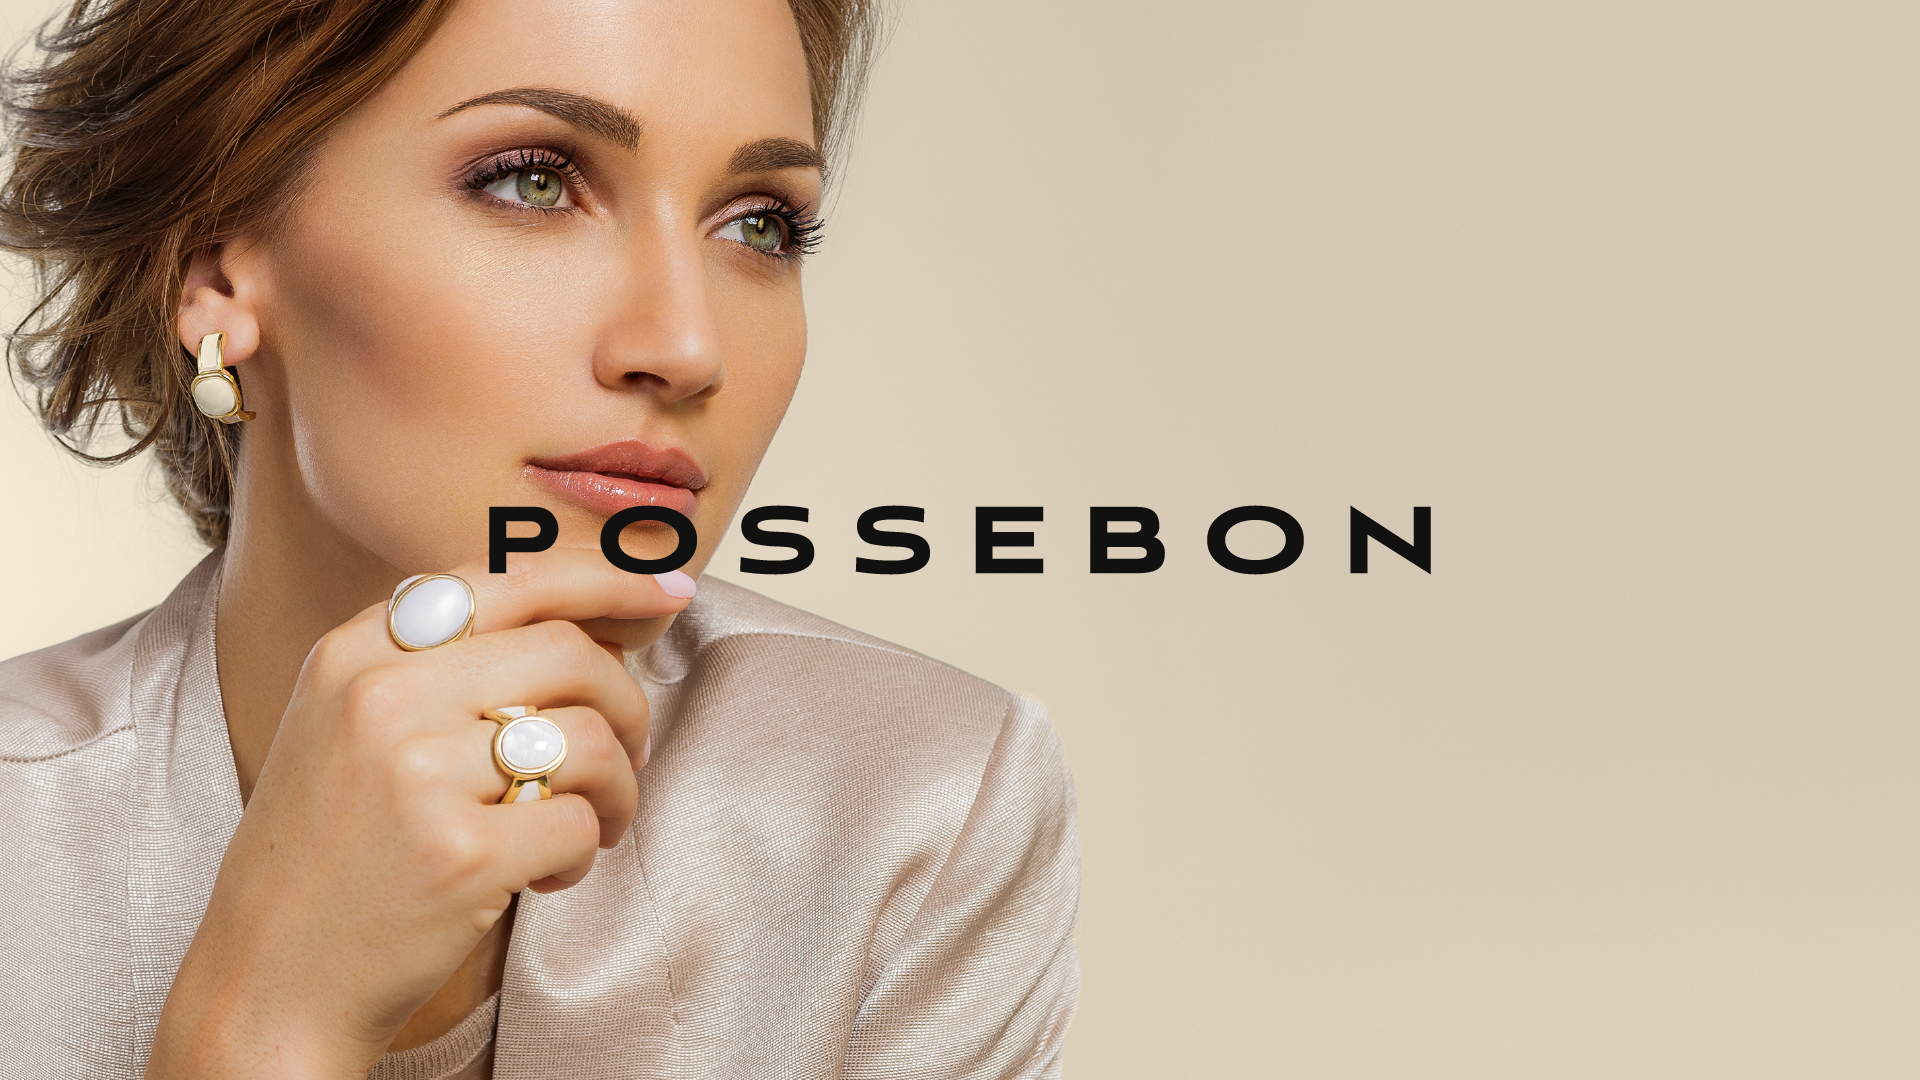 Industria Branding Co. Rebrand Possebon Jewelry to Attracts Elite Clientele and Boosts Expansion